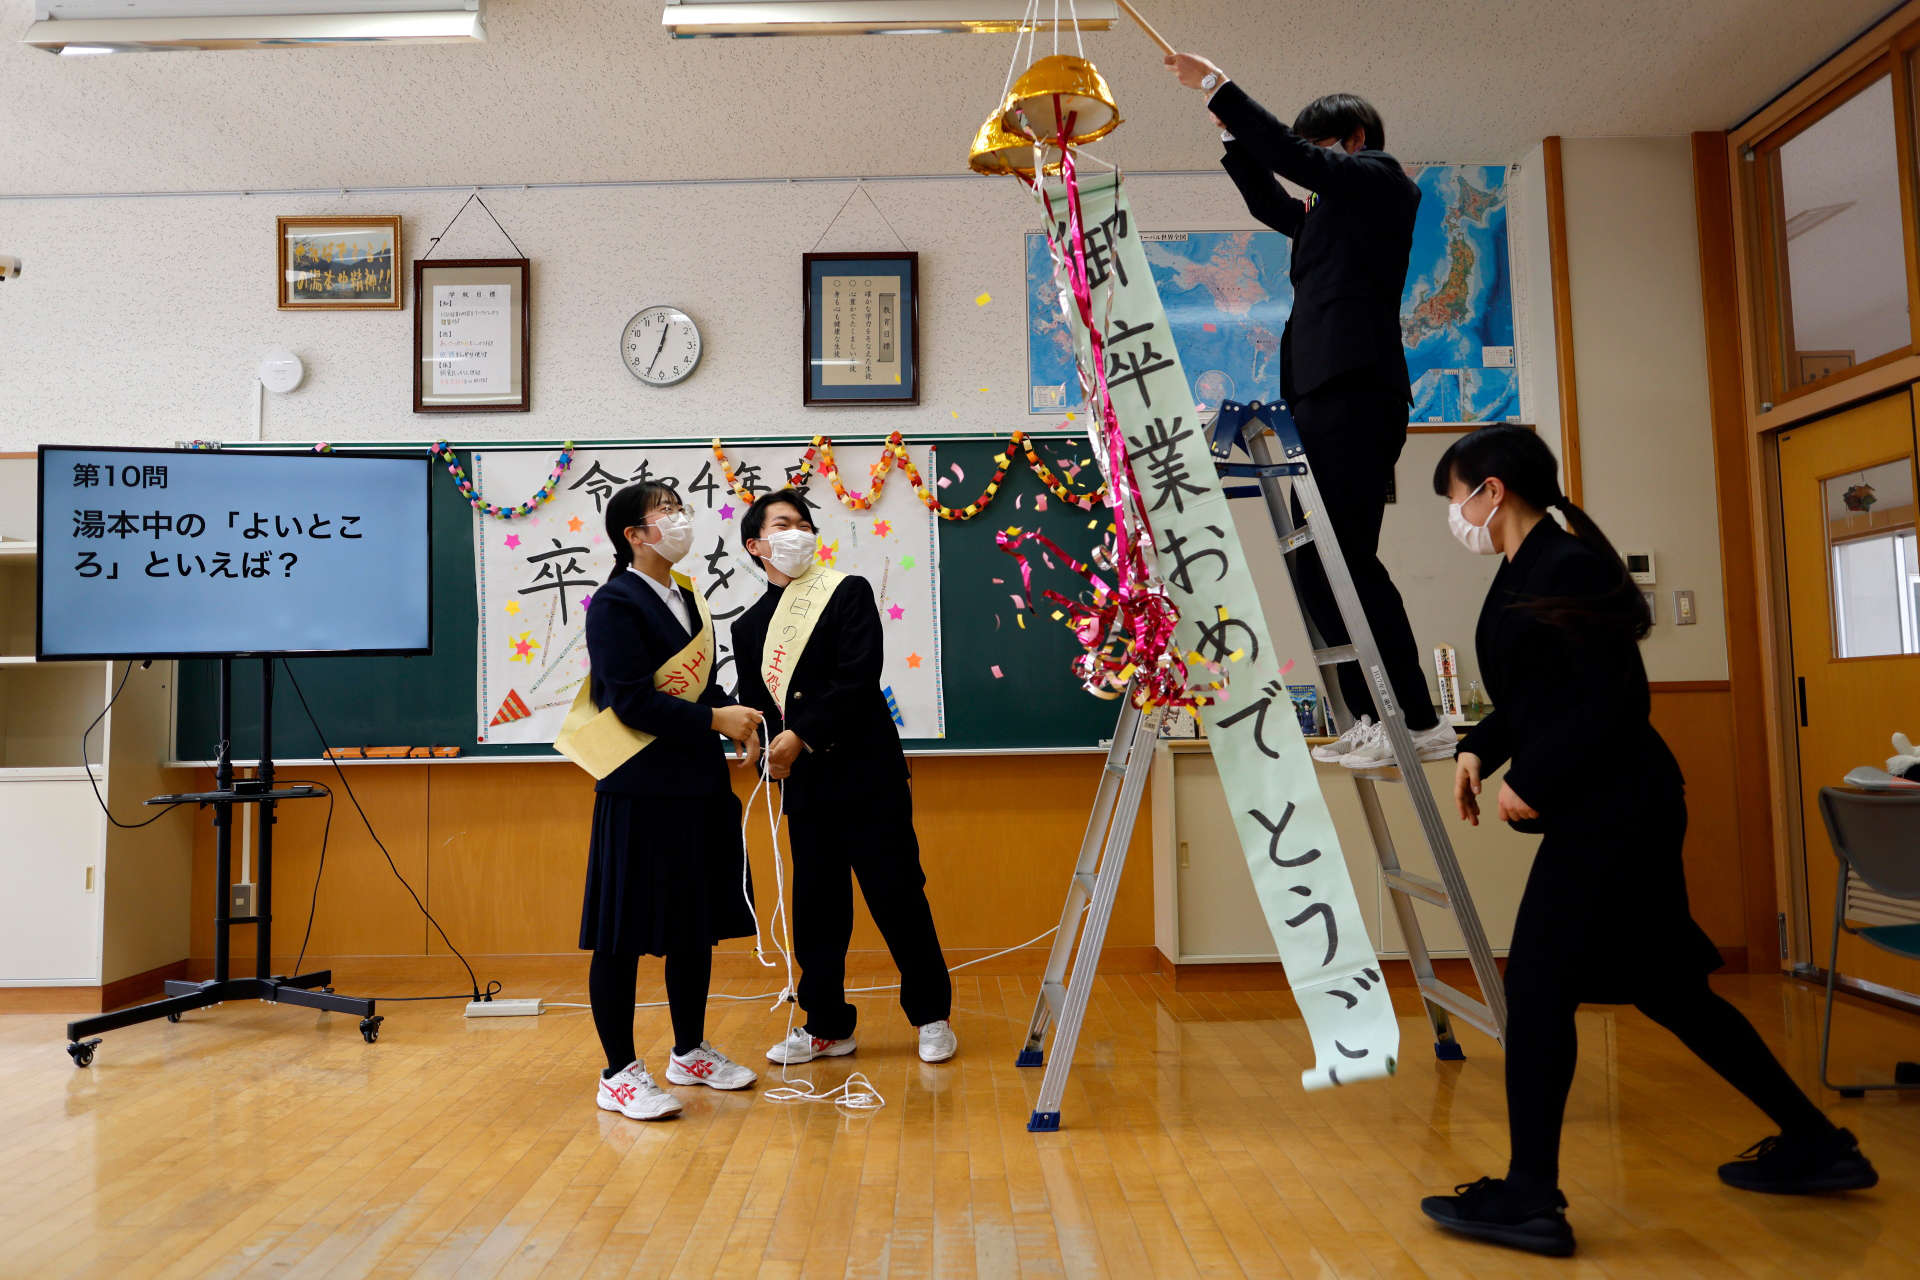 Eita, Aoi and their teachers attend a celebratory class before the students’ graduation and the institution's closing ceremony, in Ten-ei Village, Japan, March 9, 2023. Photo: Reuters